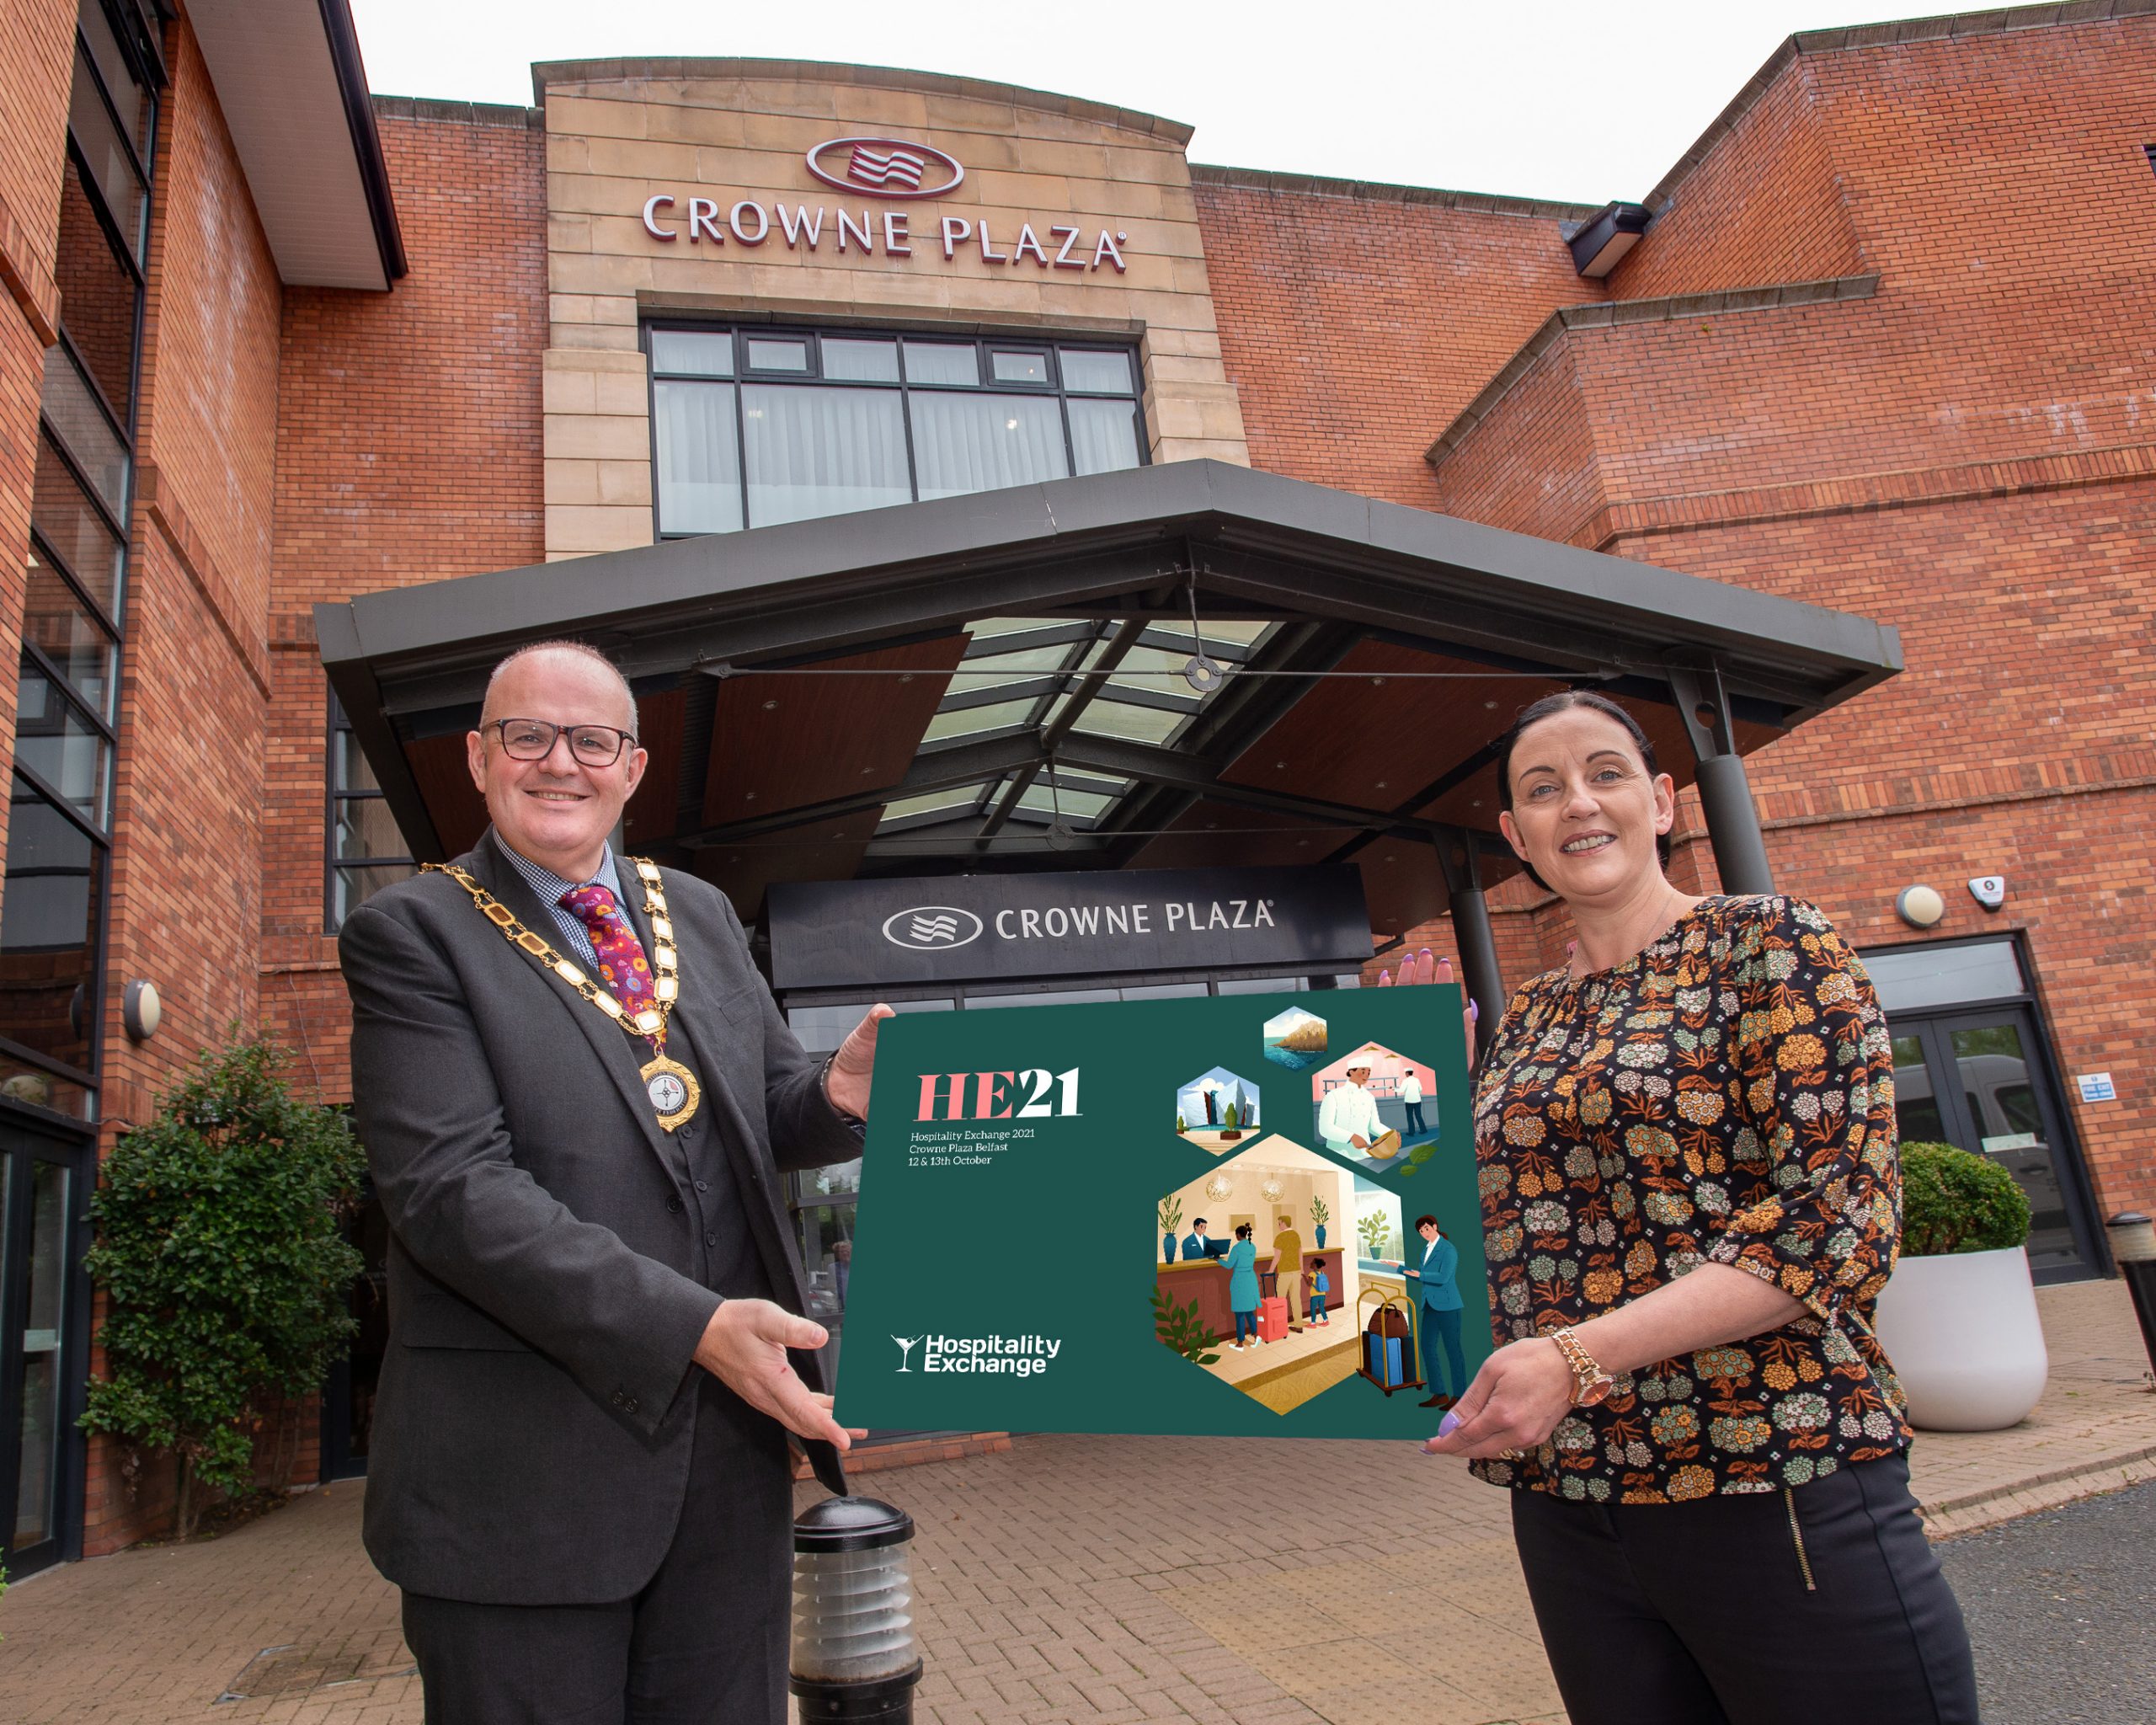 NI Hotels Federation President thrilled by return of in-person Hospitality Exchange